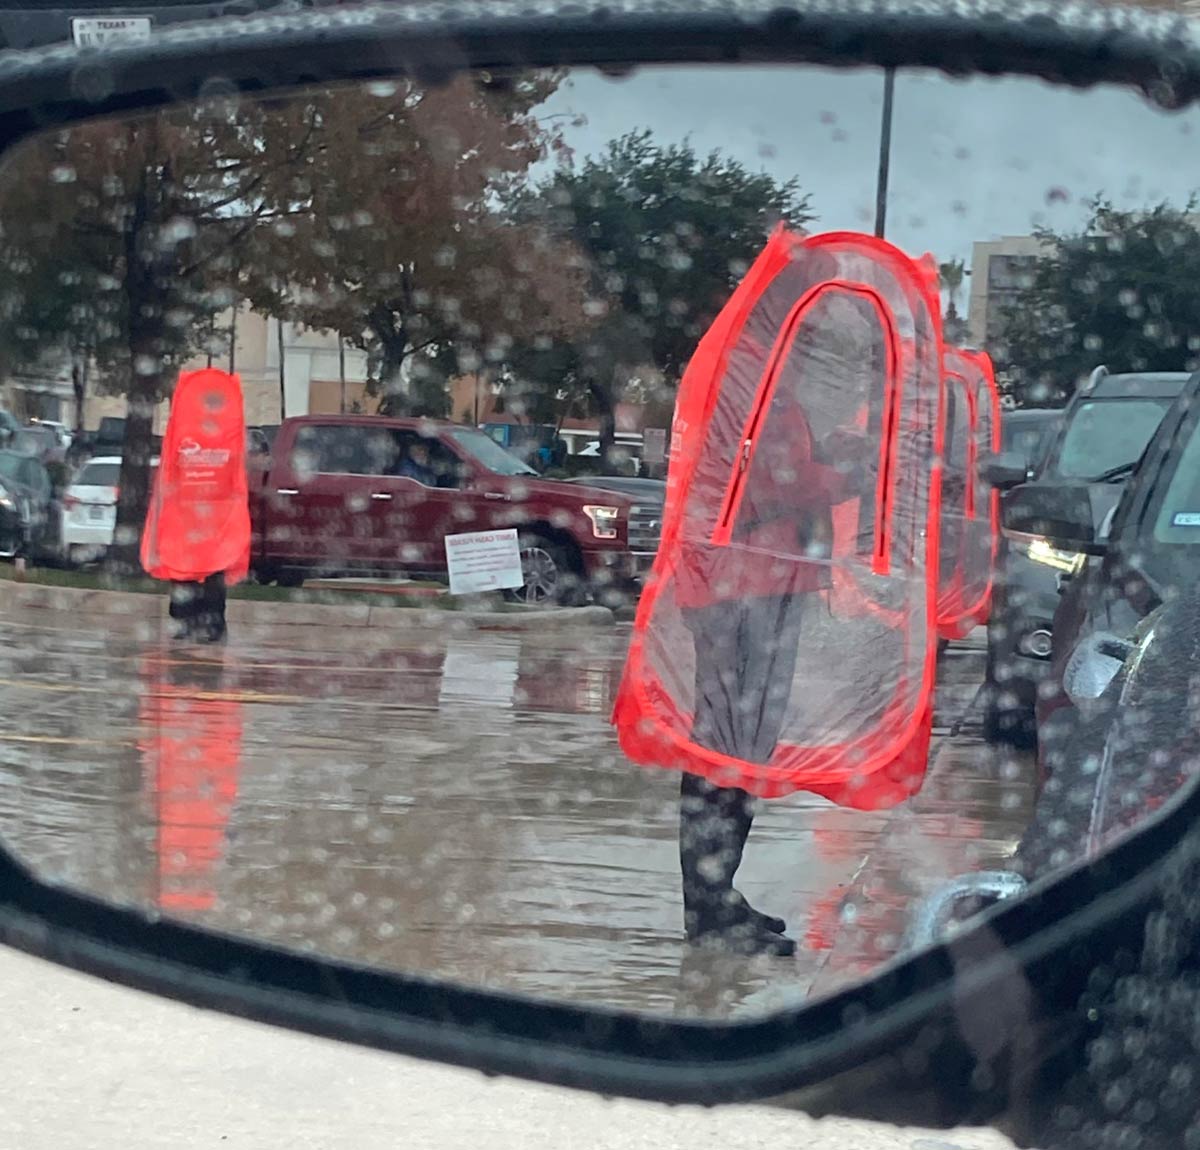 Chick-fil-a workers with the human traffic cone look